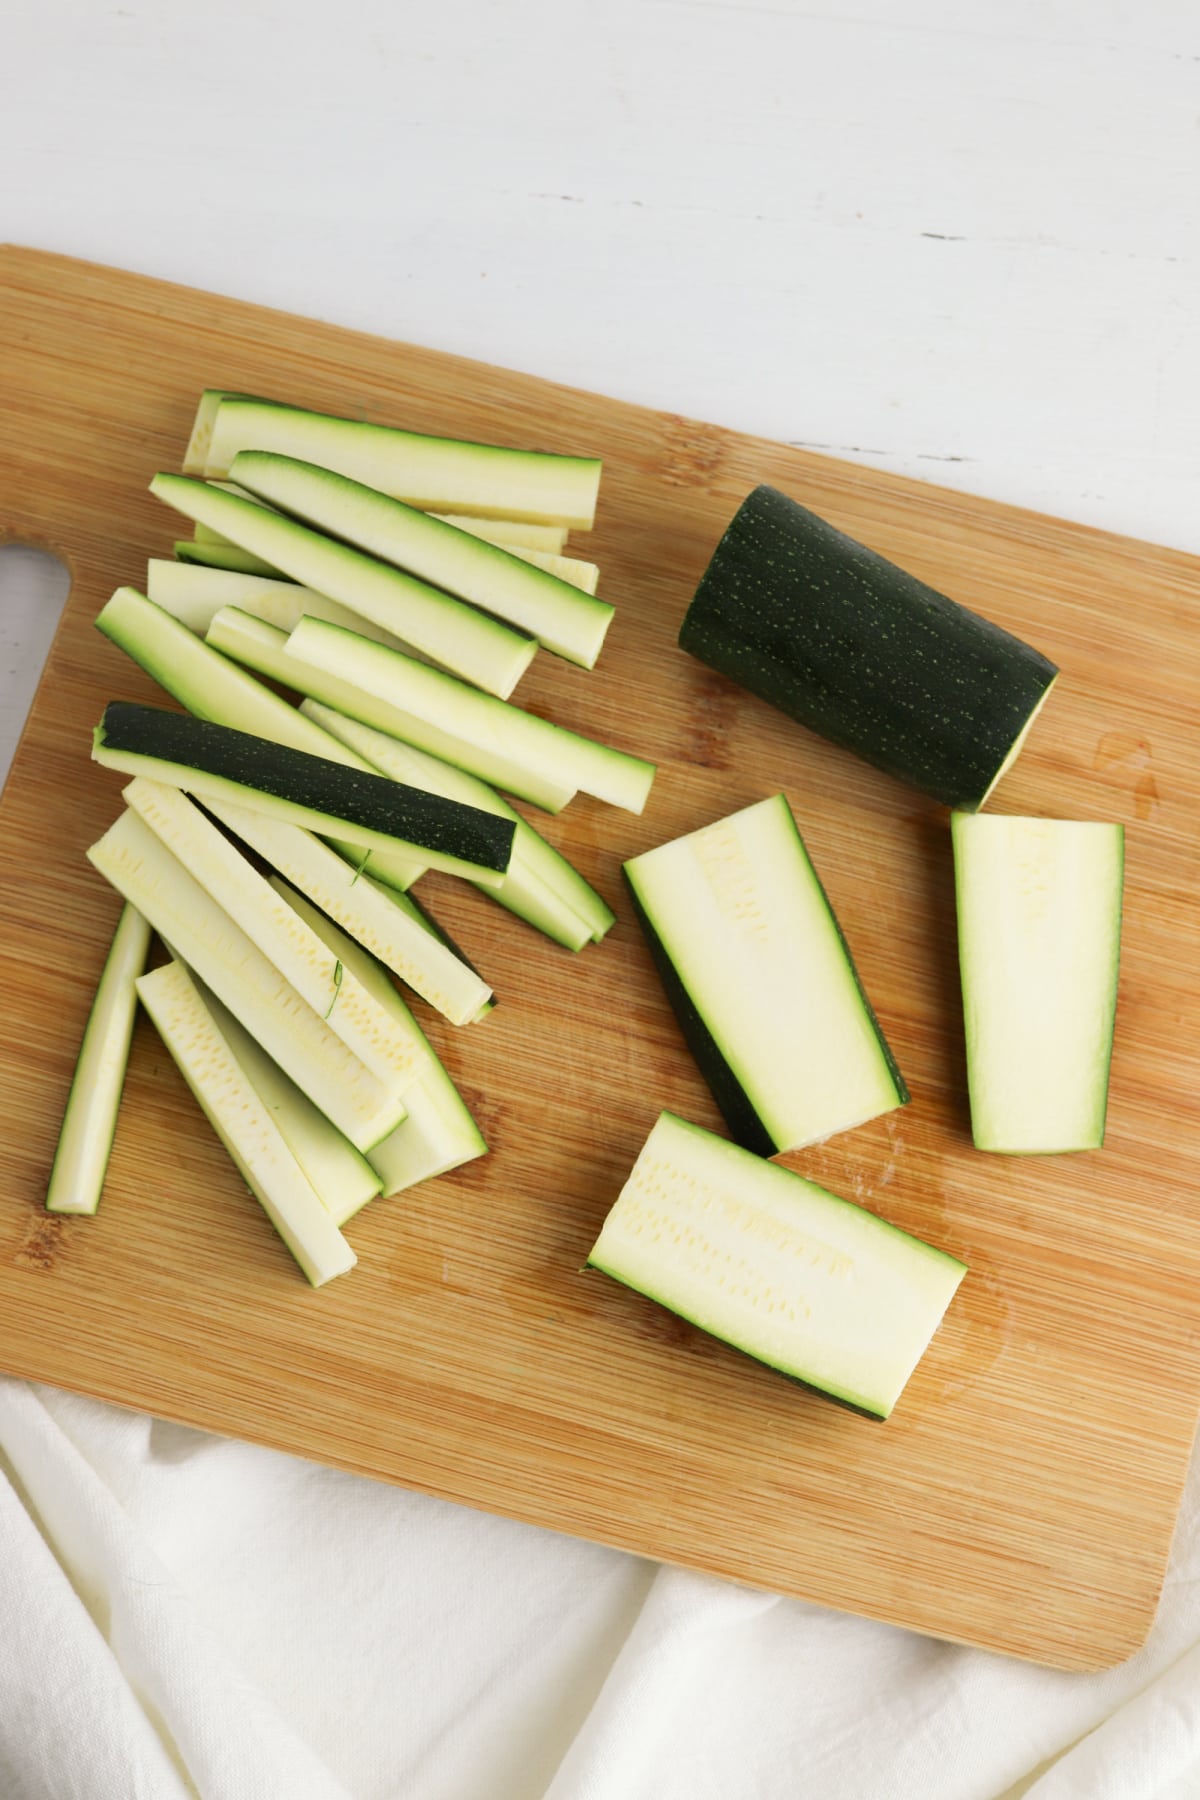 Zucchini pieces on wooden cutting board